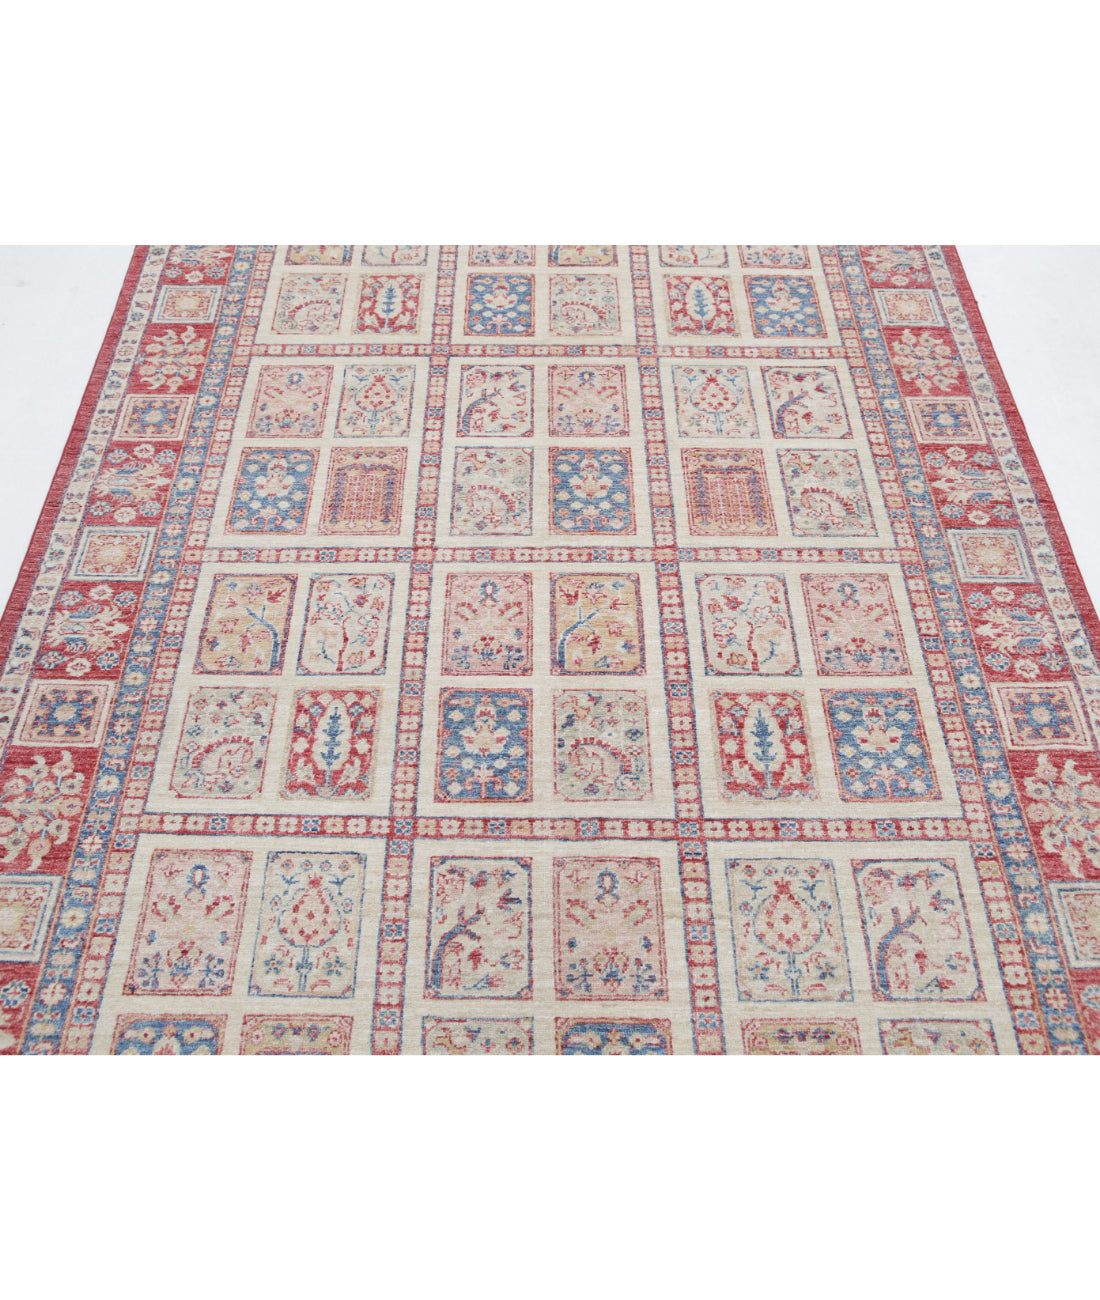 Hand Knotted Bakhtiari Wool Rug - 5'6'' x 7'10'' 5'6'' x 7'10'' (165 X 235) / Multi / Red